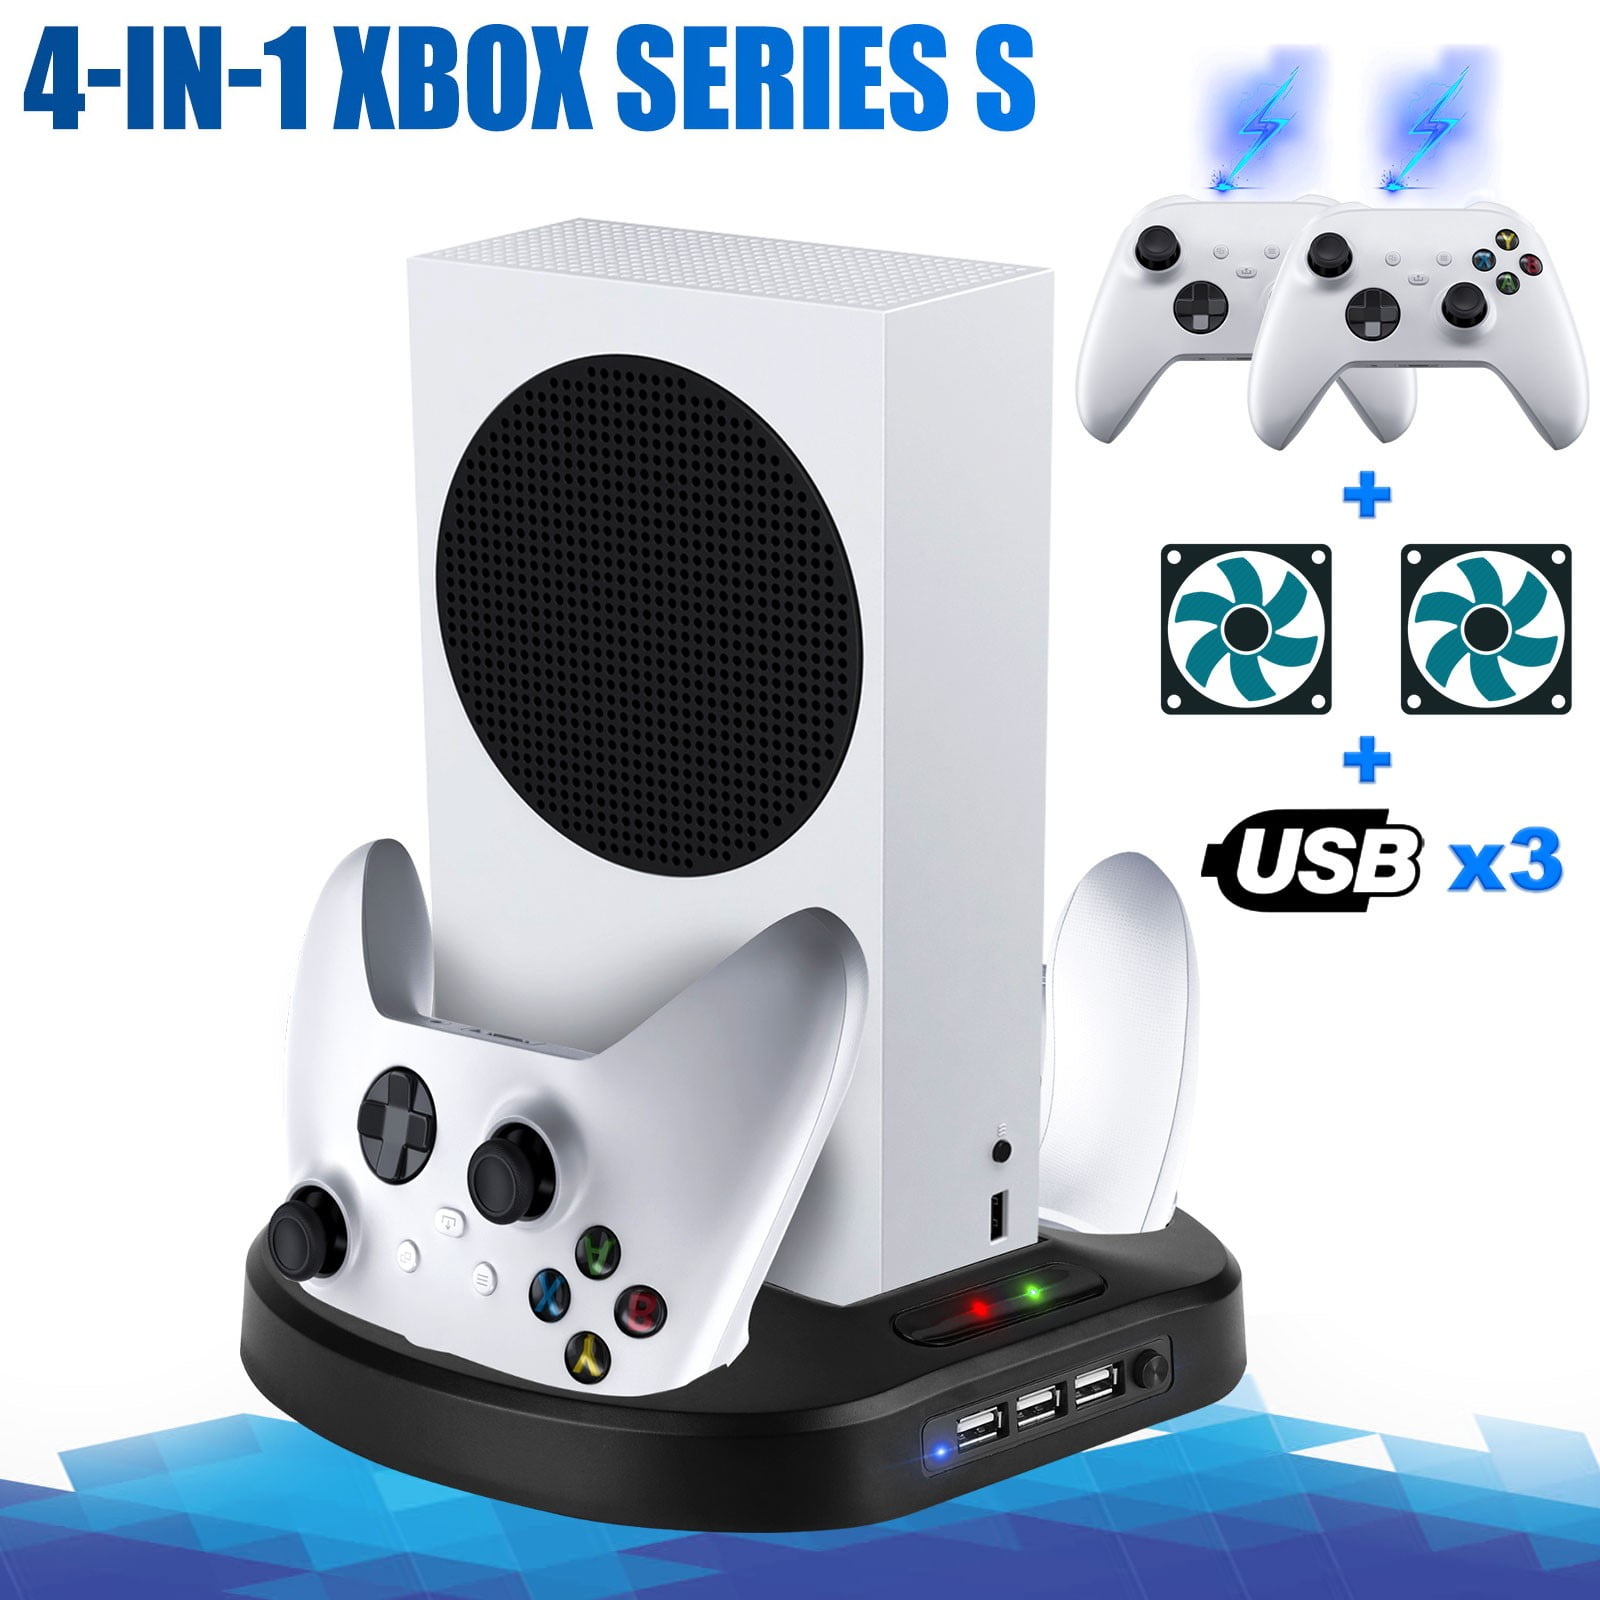 Vertical Stand Fit for Xbox Series S with 2 Cooling Fans, EEEkit Dual Controller Charging Station Fit for Microsoft Xbox Series S/X Controller W/ 3 USB Ports, 2 Charger Ports, LED Indicator